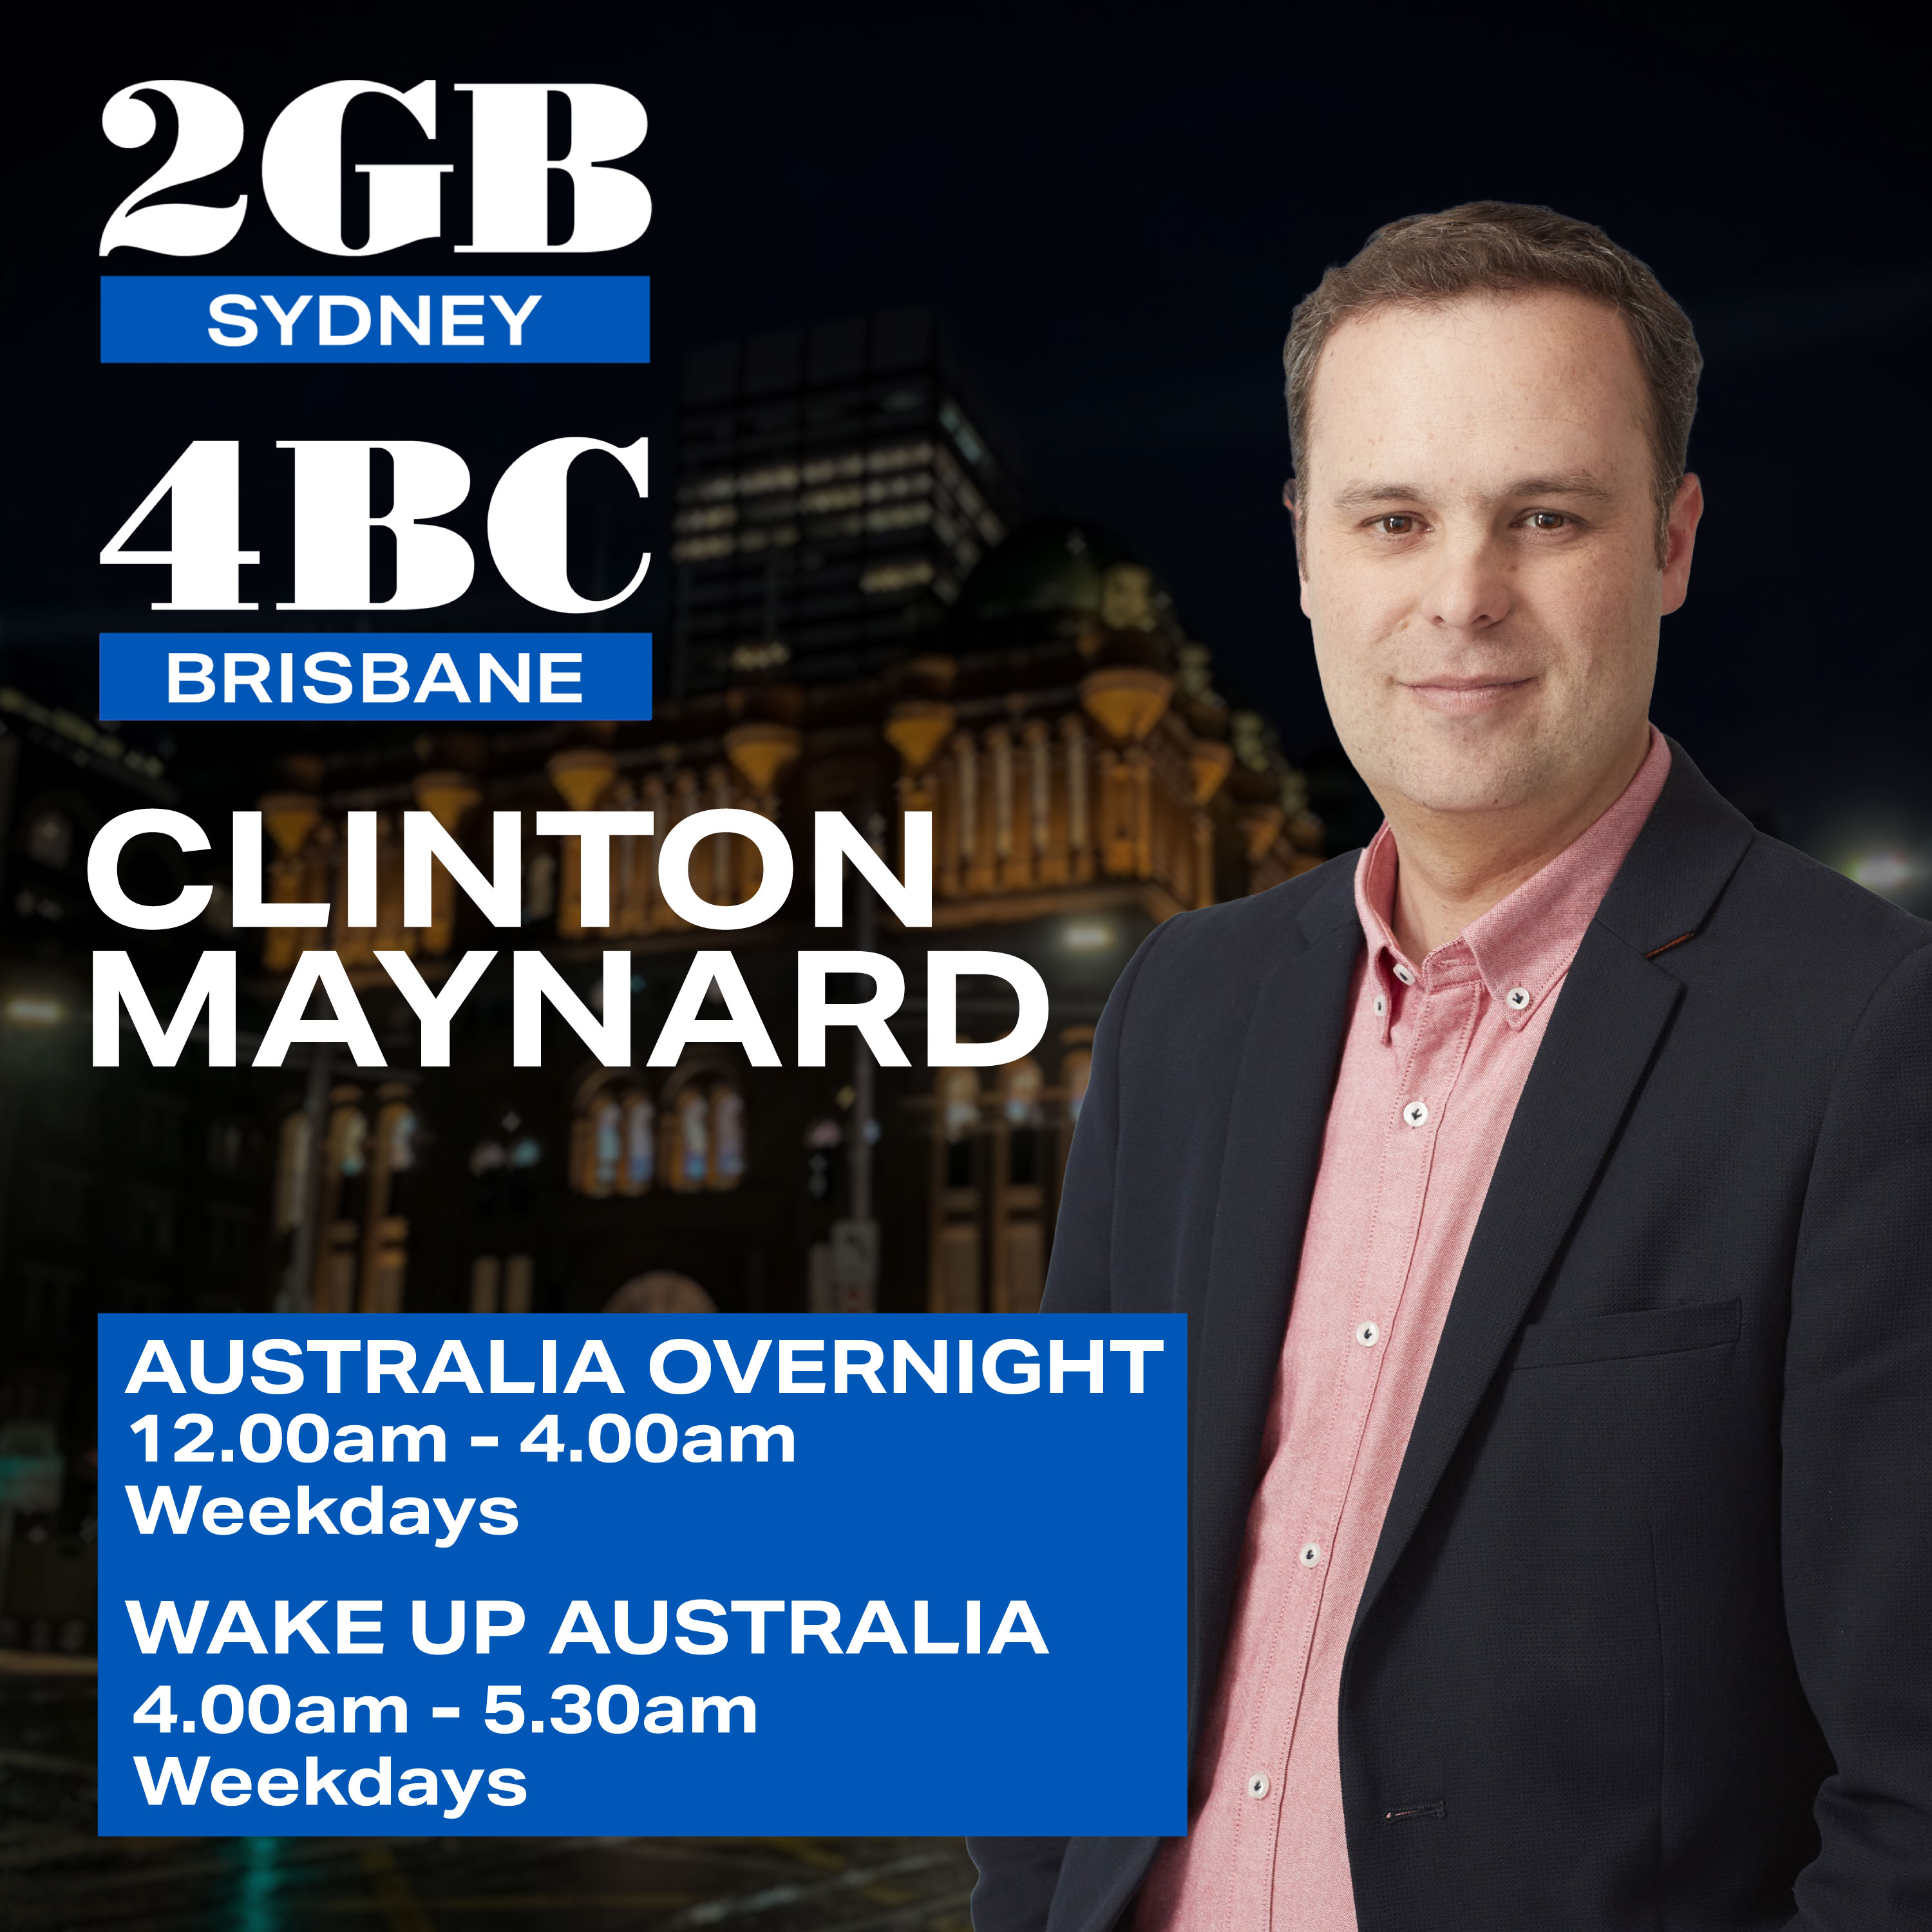 Overnights with Clinton Maynard - Tuesday, 23rd of April